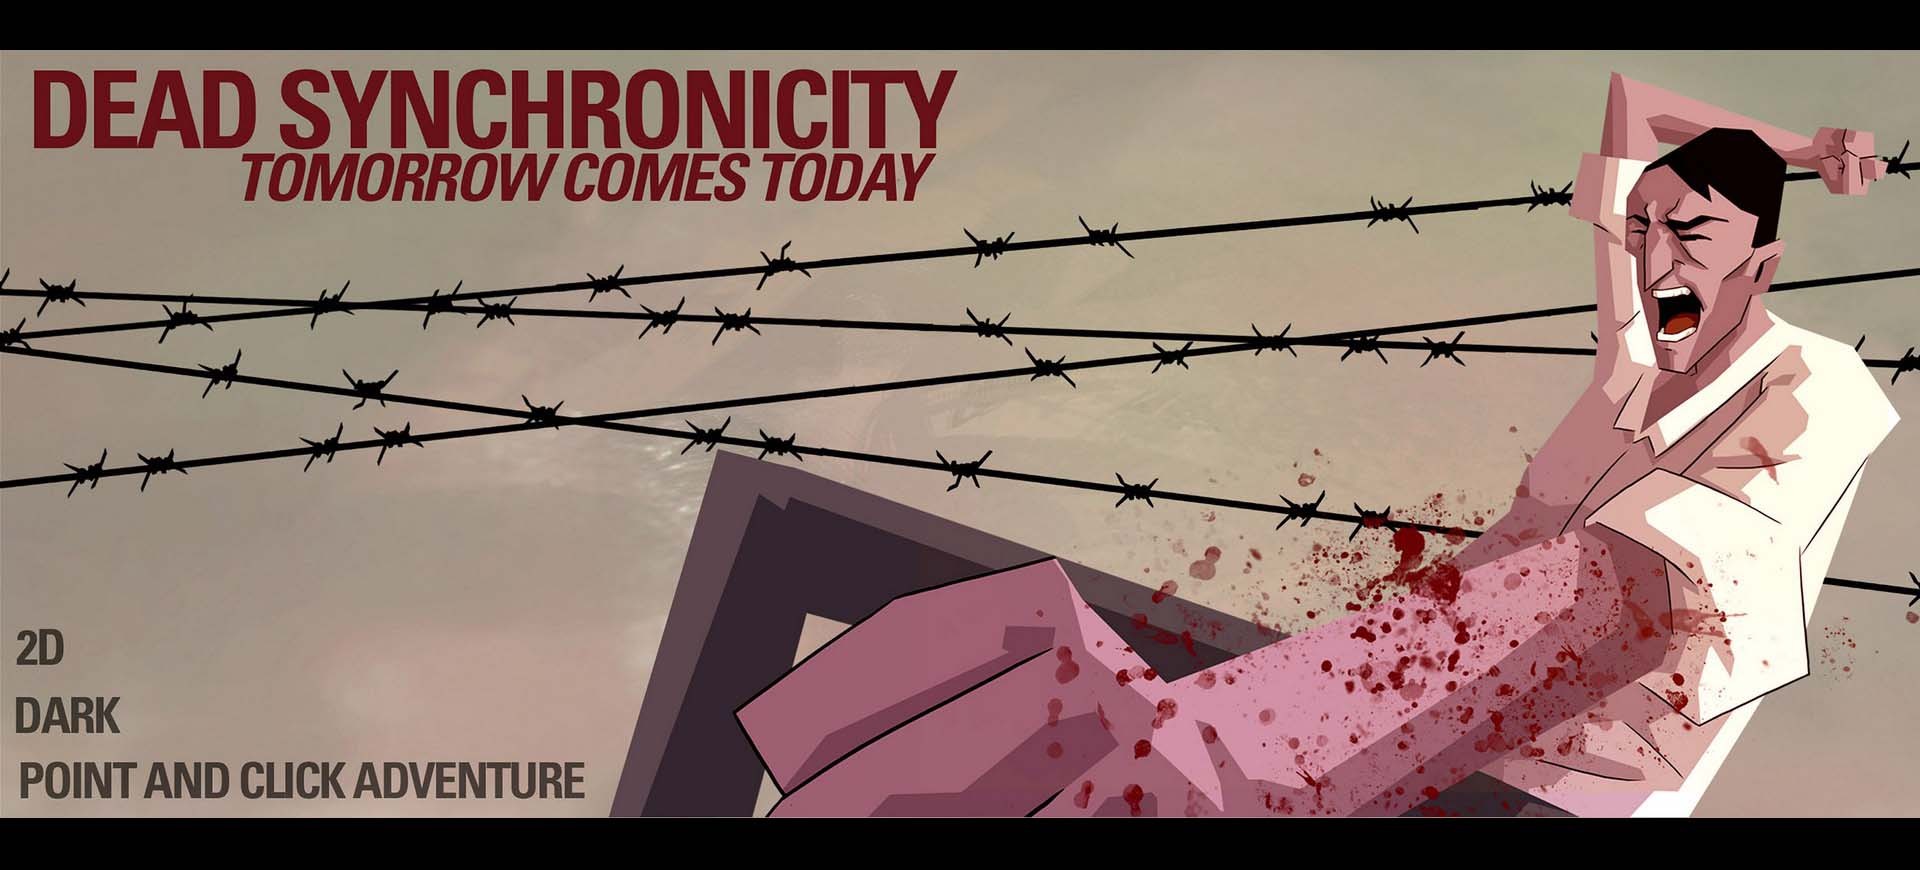 dead-synchronicity-tomorrow-comes-today-lac-trong-the-gioi-hon-mang